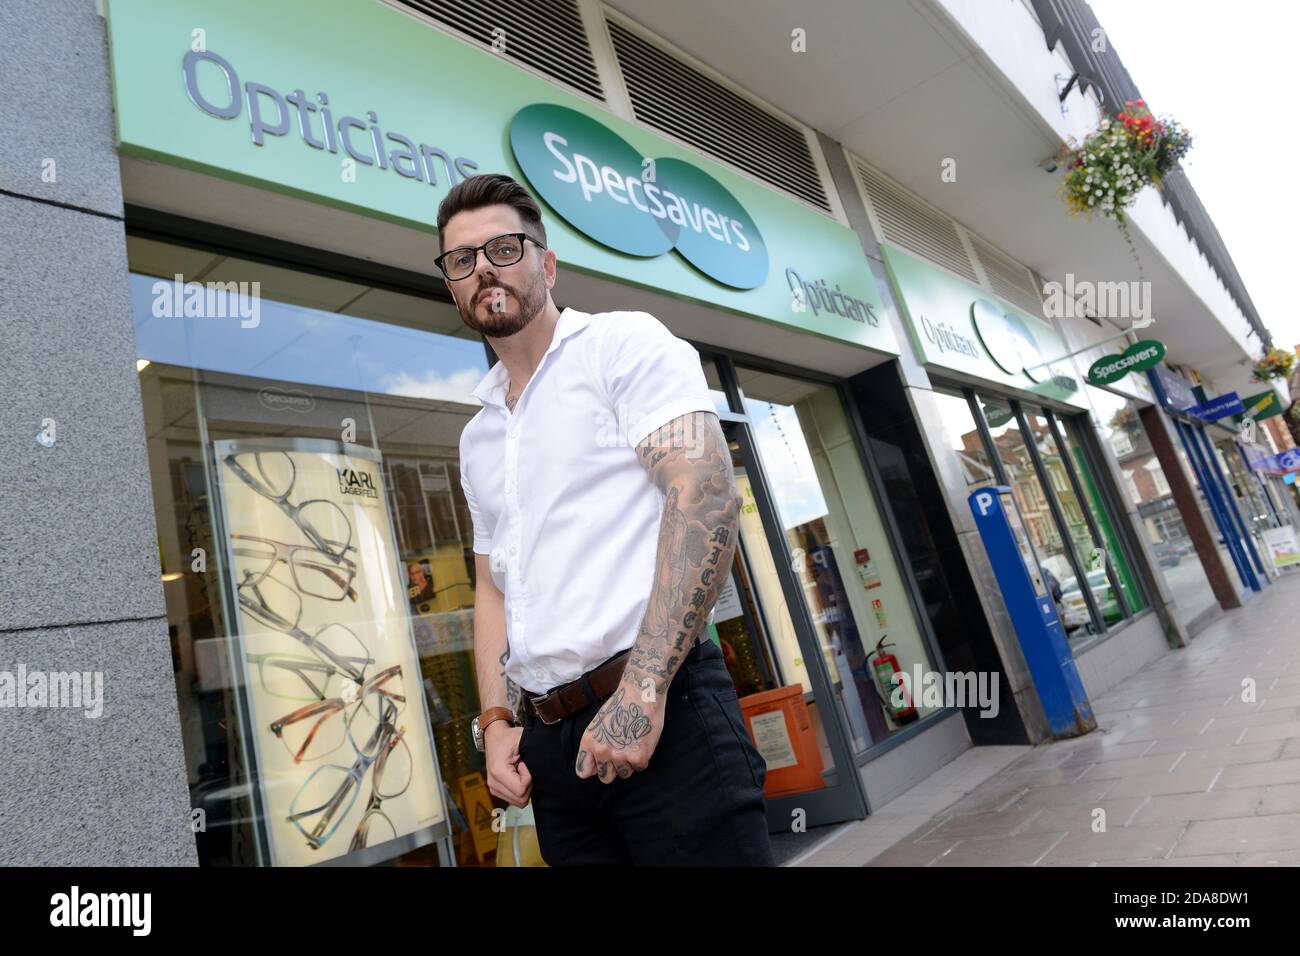 Mark Roche, 32, chosen out of hundreds of people across the Midlands as a regional finalist for the title of Specsavers Spectacle Wearer of the Year. Stock Photo